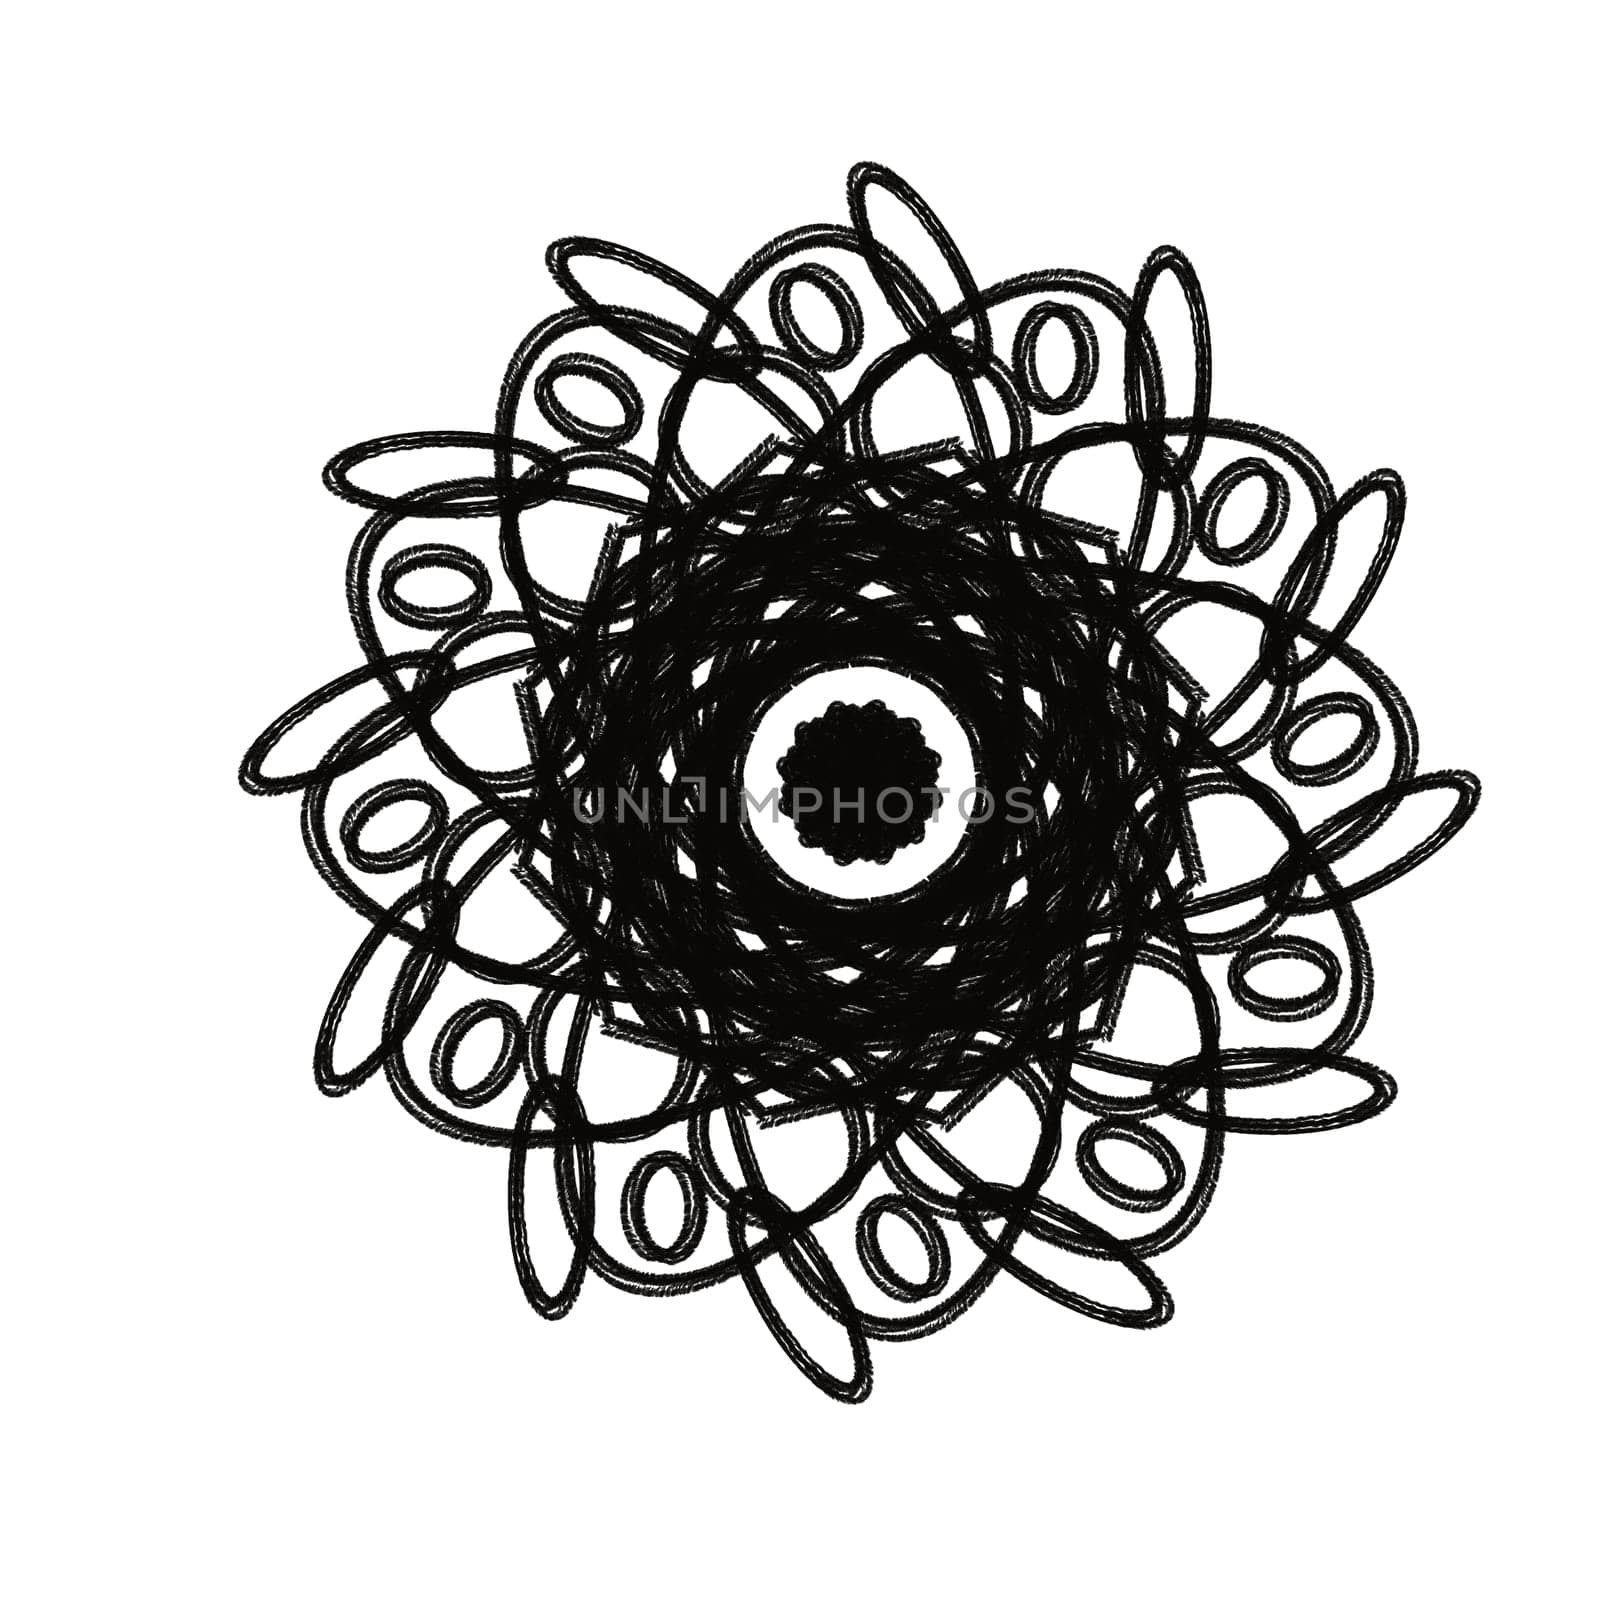 Black and White Hand Drawn Mandala for Coloring Pages, Coloring Books and Coloring Sheets. by Rina_Dozornaya